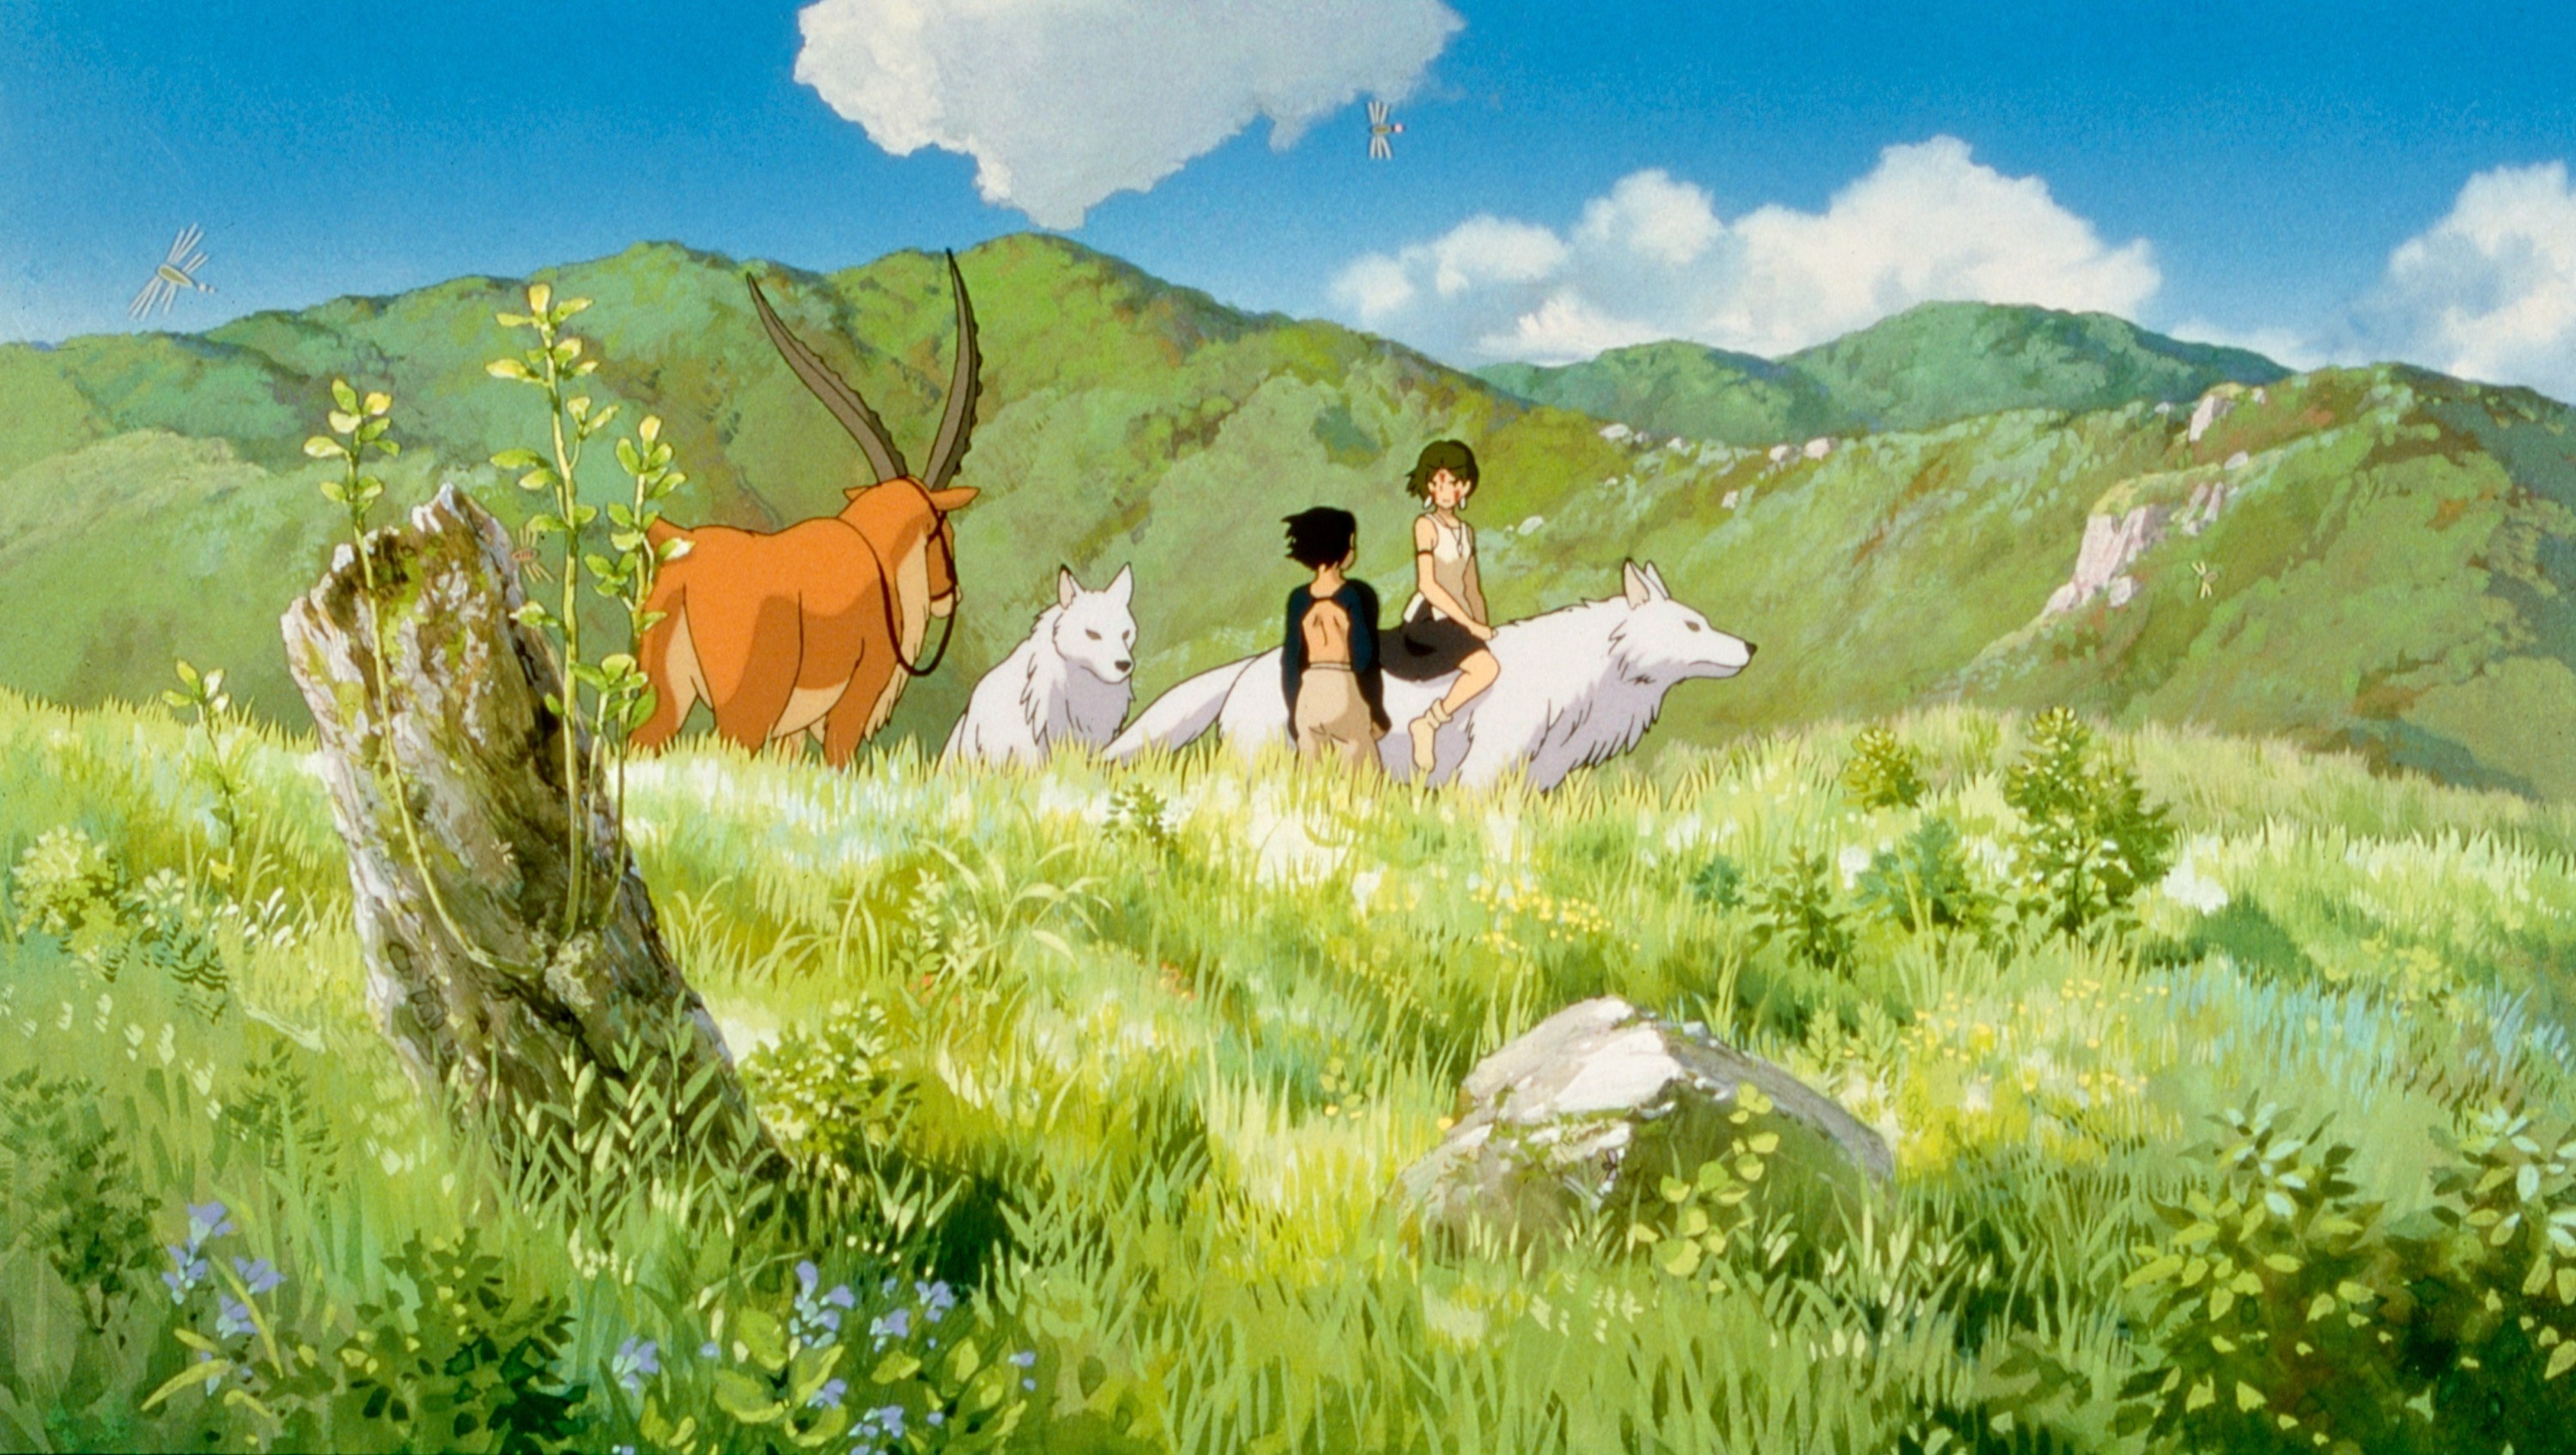 Prince Ashitaka (voice: Billy Crudup), San (voice: Claire Danes), Moro (voice: Gillian Anderson) standing in a green field